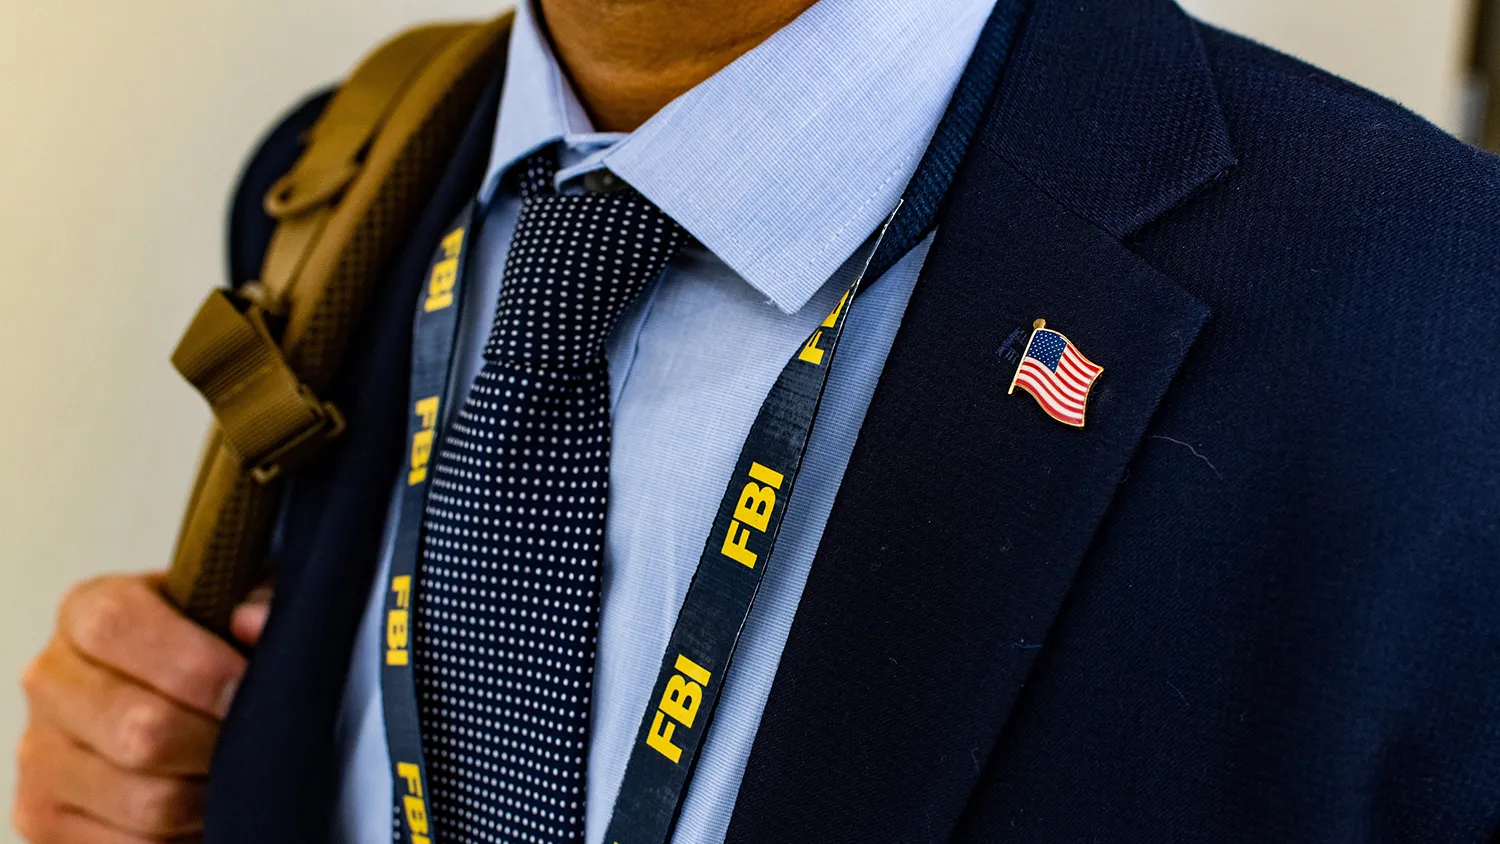 Close up of FBI lanyard and American flag pin, with military backpack in the background.